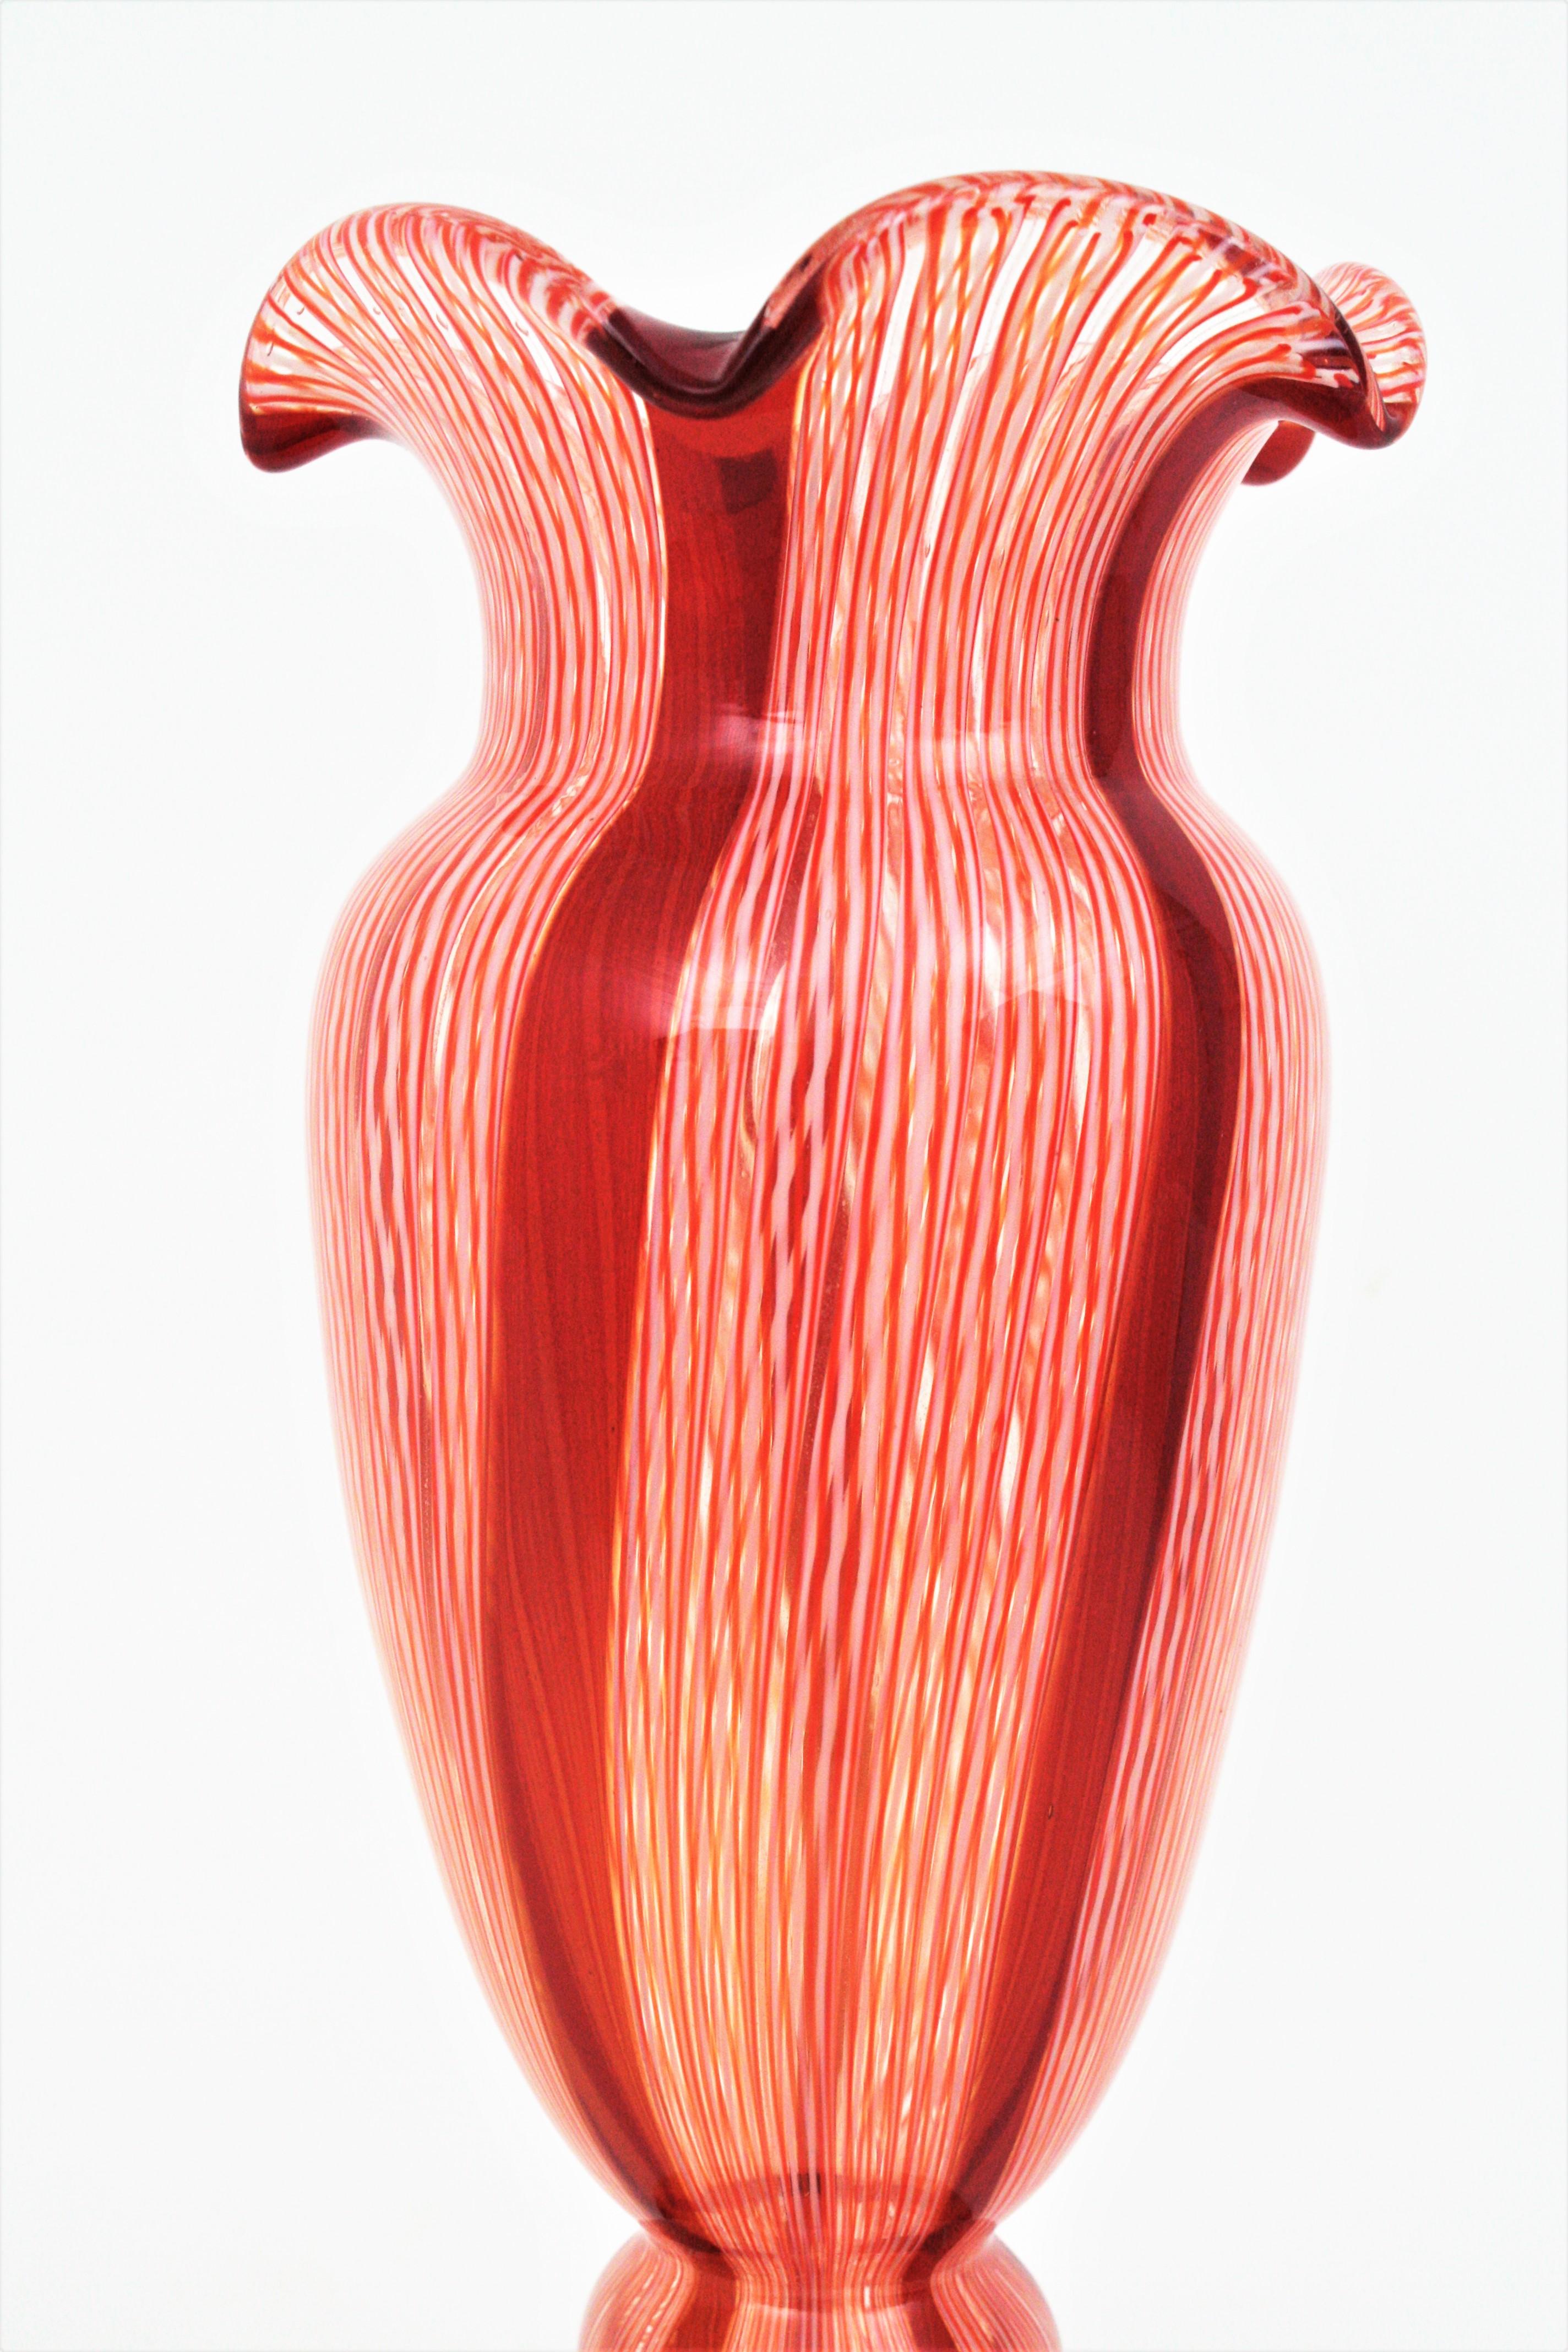 Italian Fratelli Toso Murano Red and White Ribbons Large Art Glass Vase For Sale